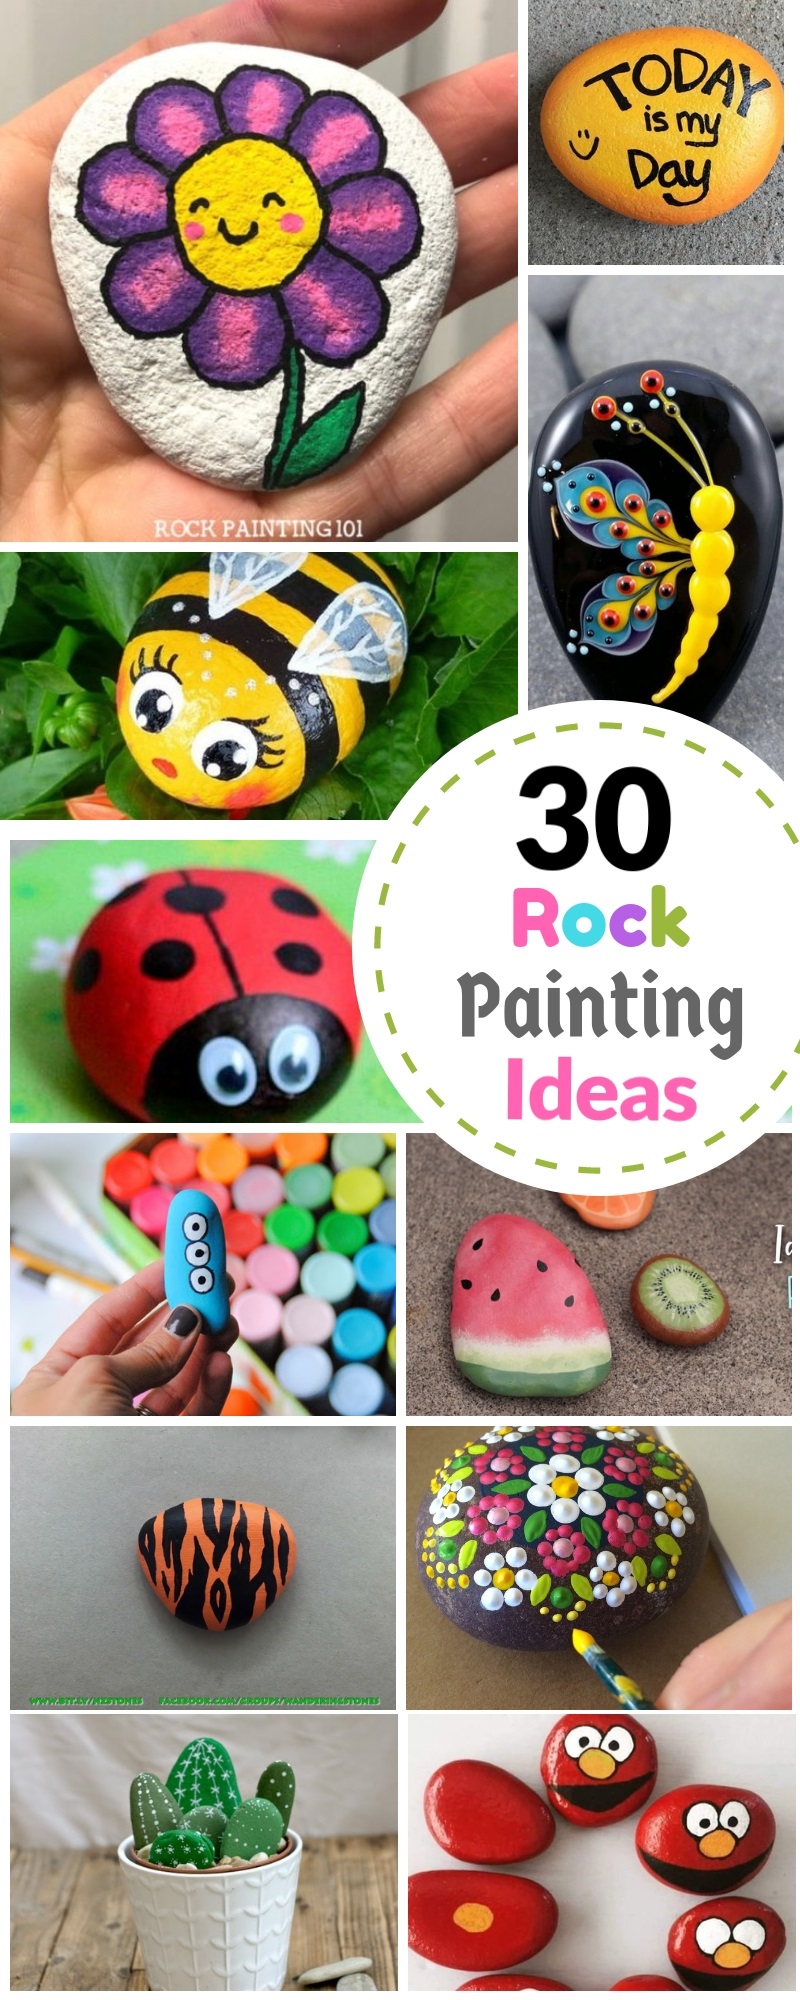 30 Diy Rock Painting Ideas Best For Summer And Winter Craft Activities